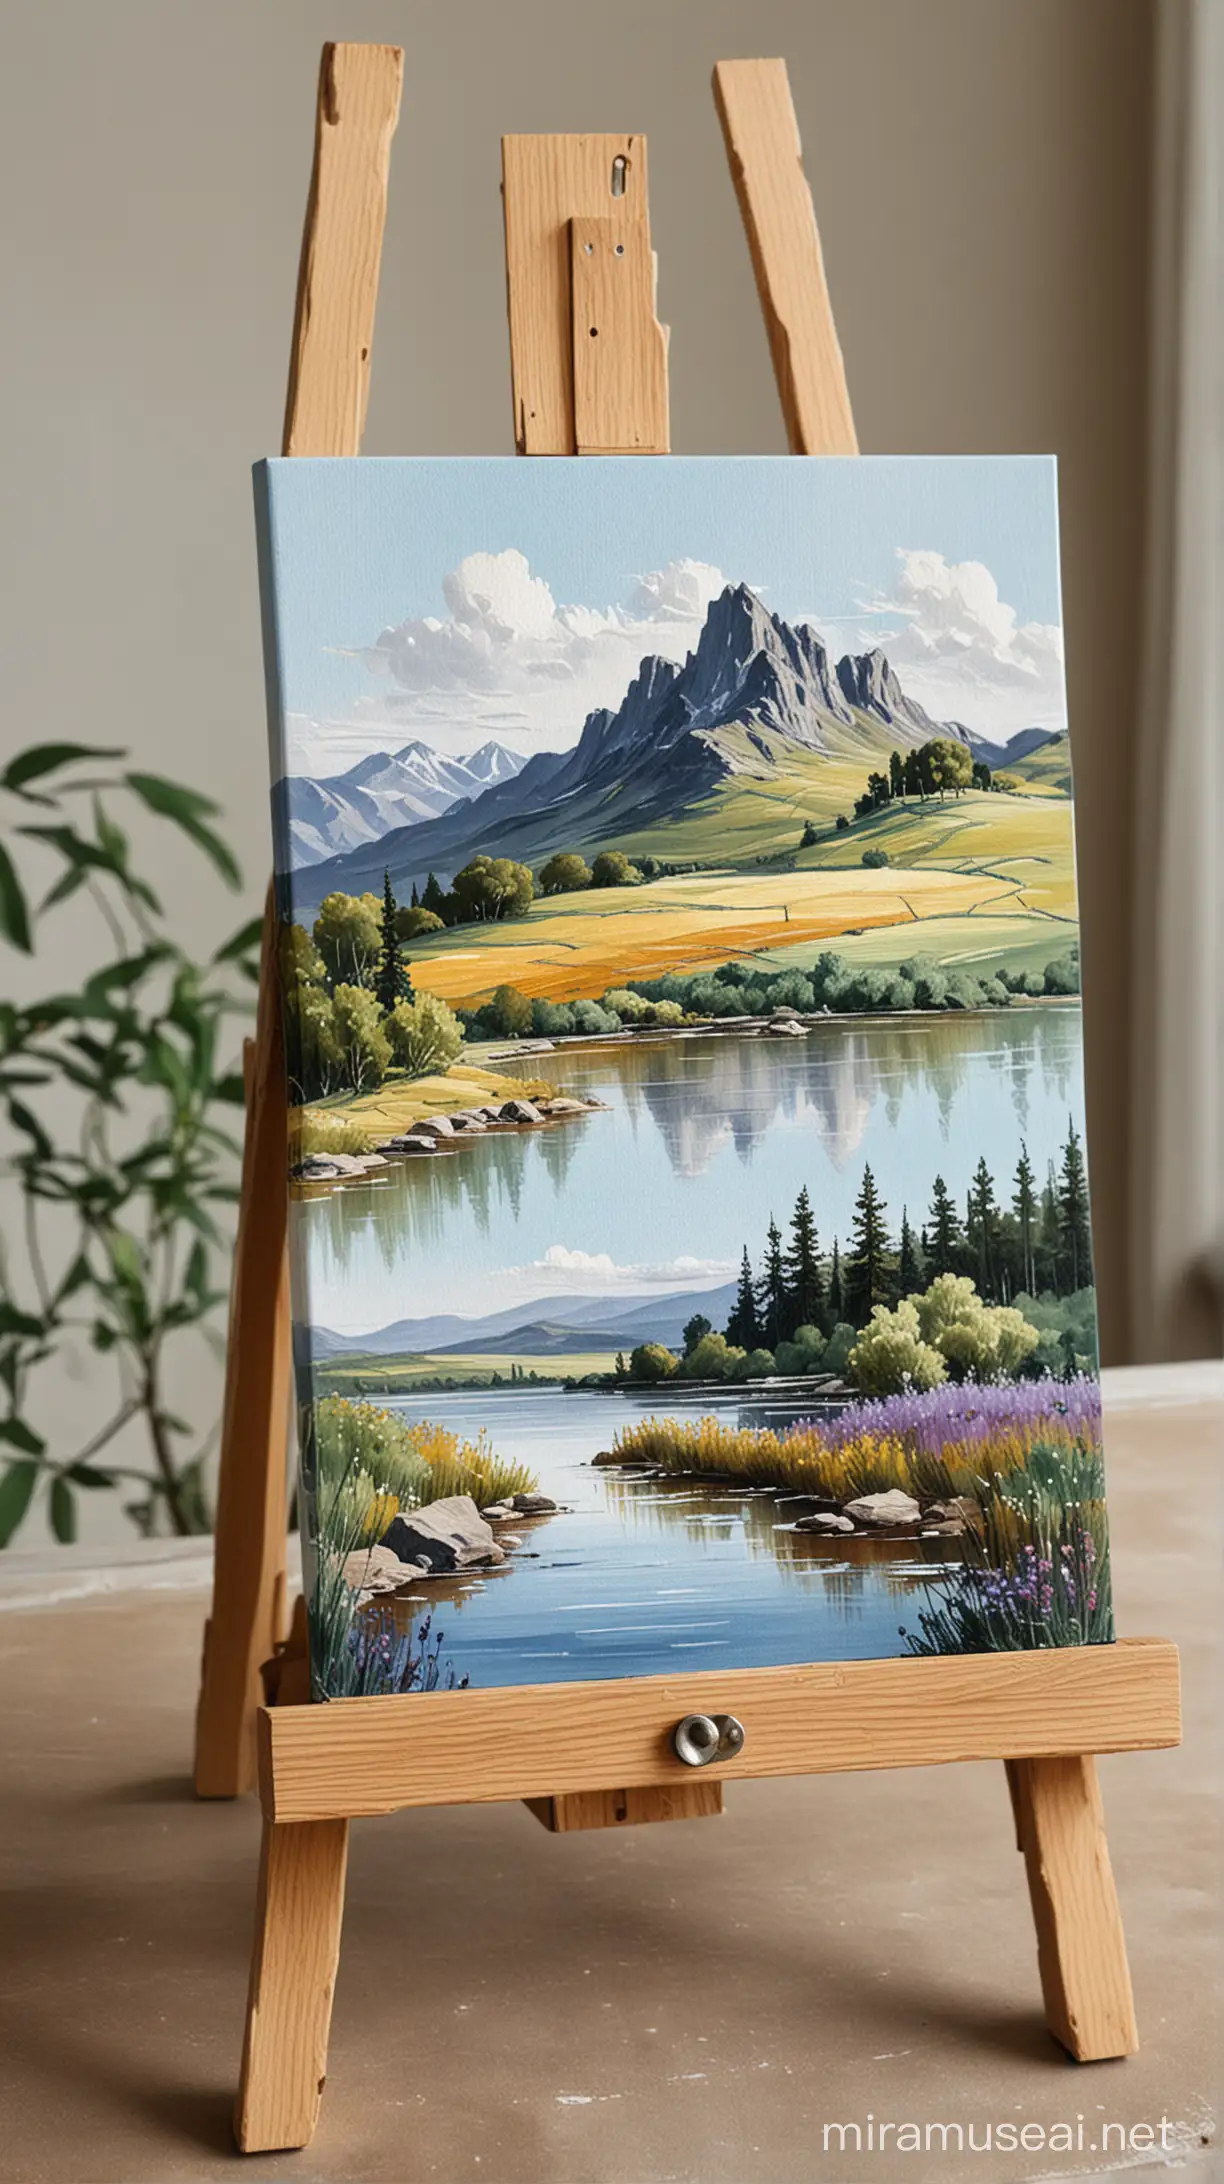 A small canvas painting on an easel with a landscape. The easel is kept on a table.